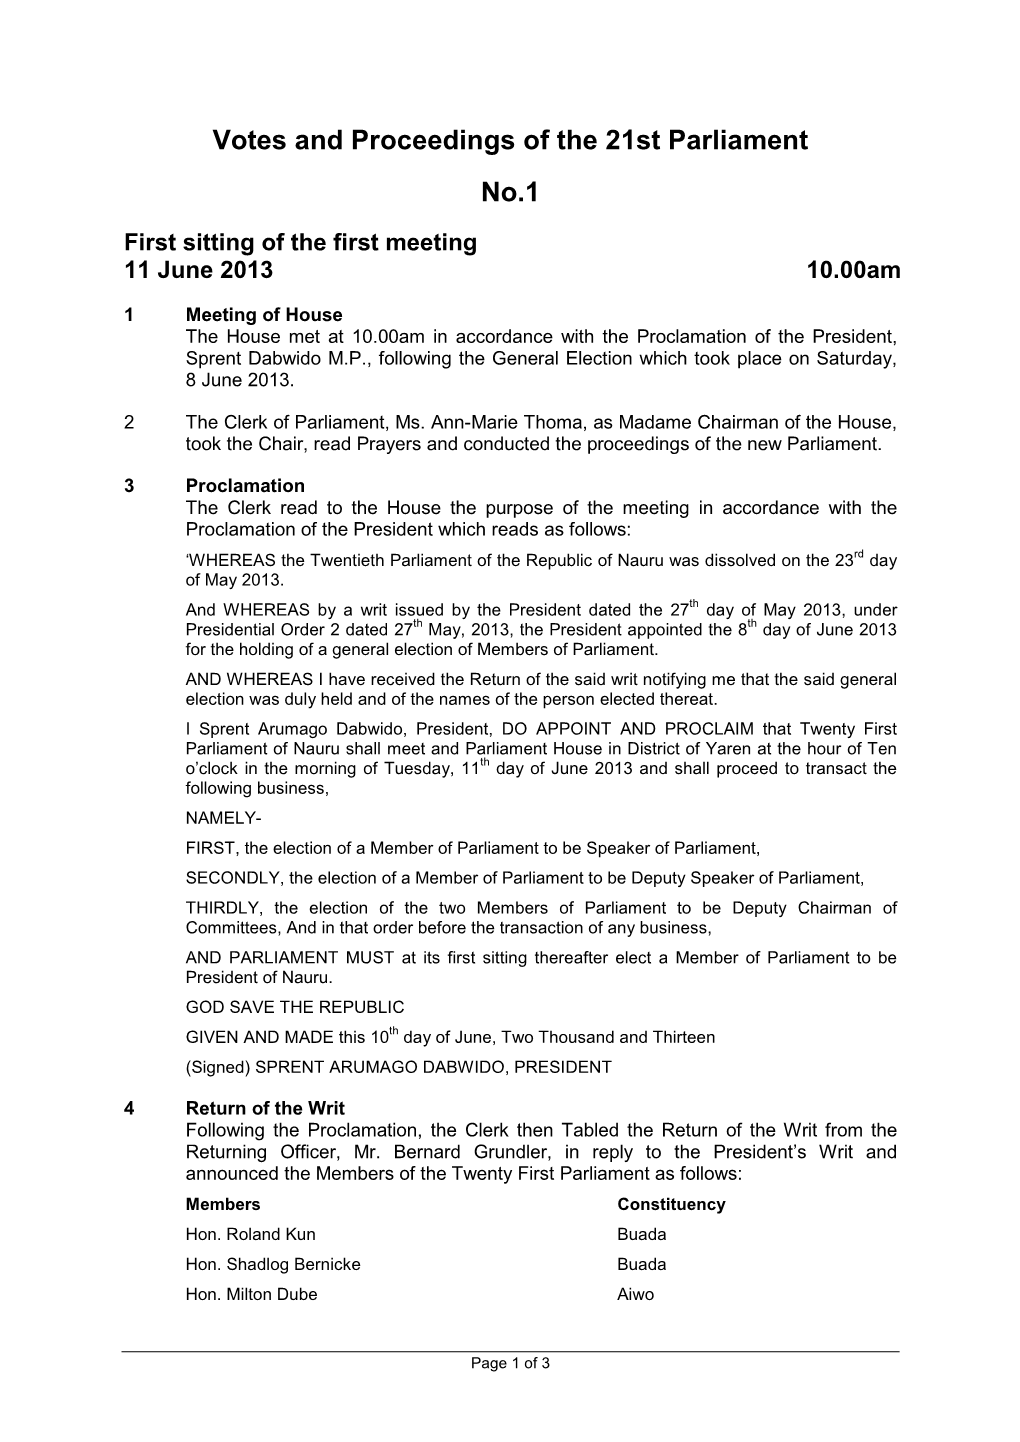 Votes and Proceedings of the 21St Parliament No.1 First Sitting of the First Meeting 11 June 2013 10.00Am